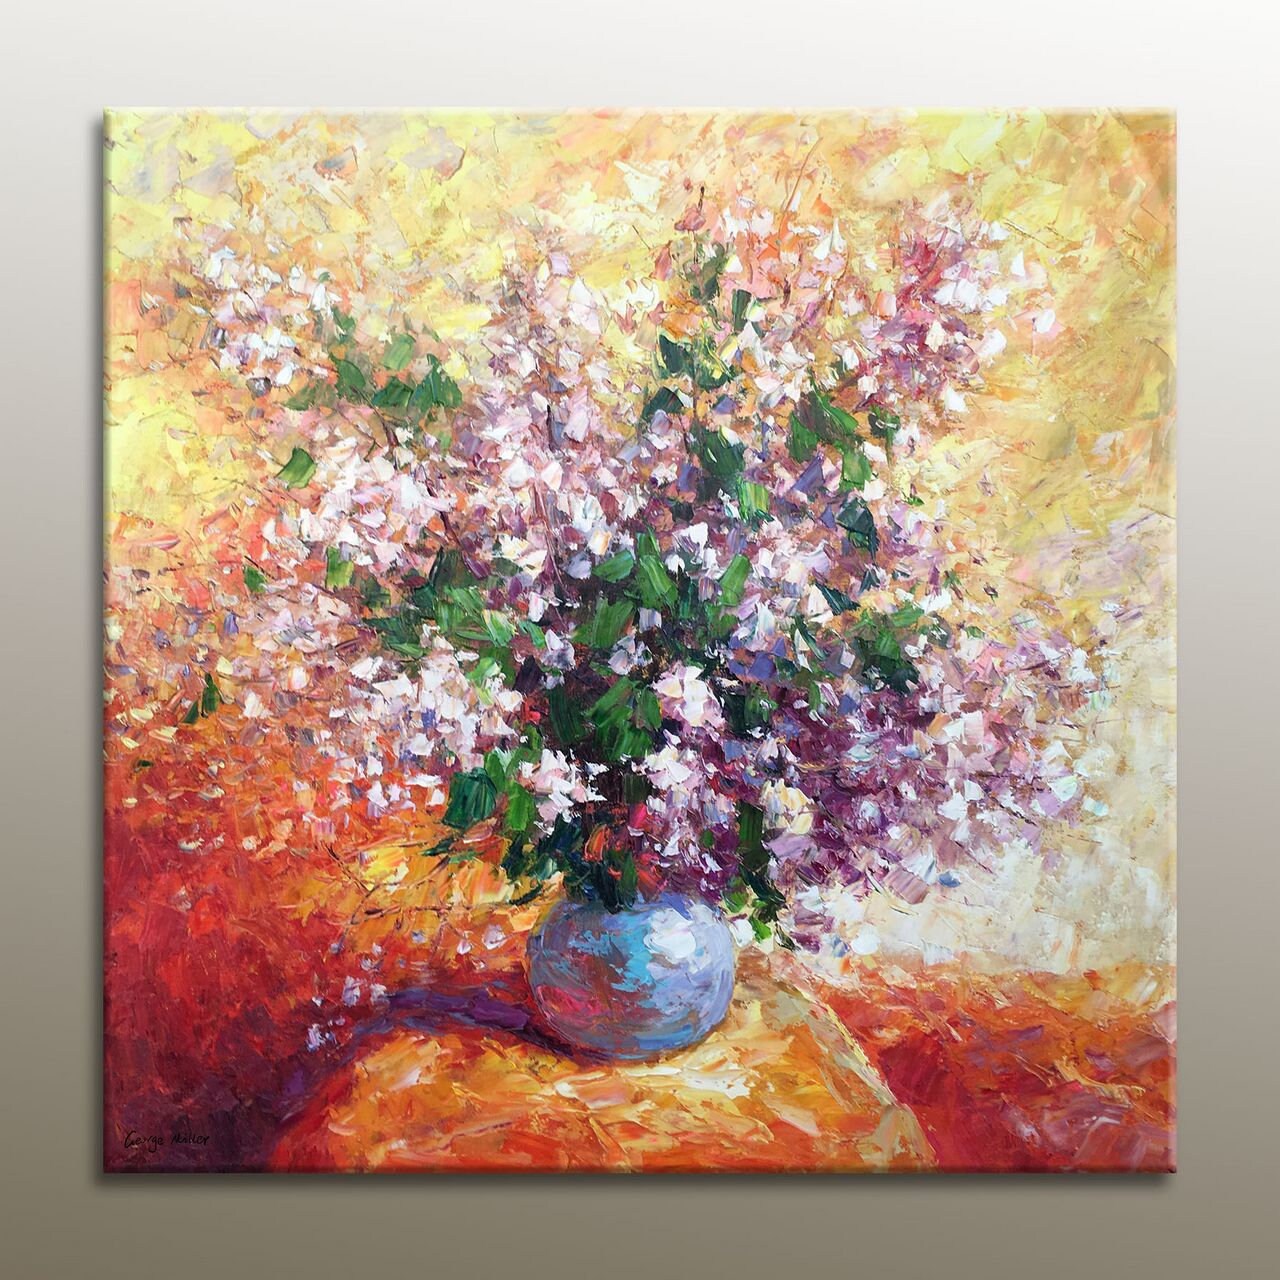 Floral Oil Painting, Canvas Painting, Oil Painting Flowers, Wall Decor, Original Floral Painting, Contemporary Art, Floral Art, Pink, Knife